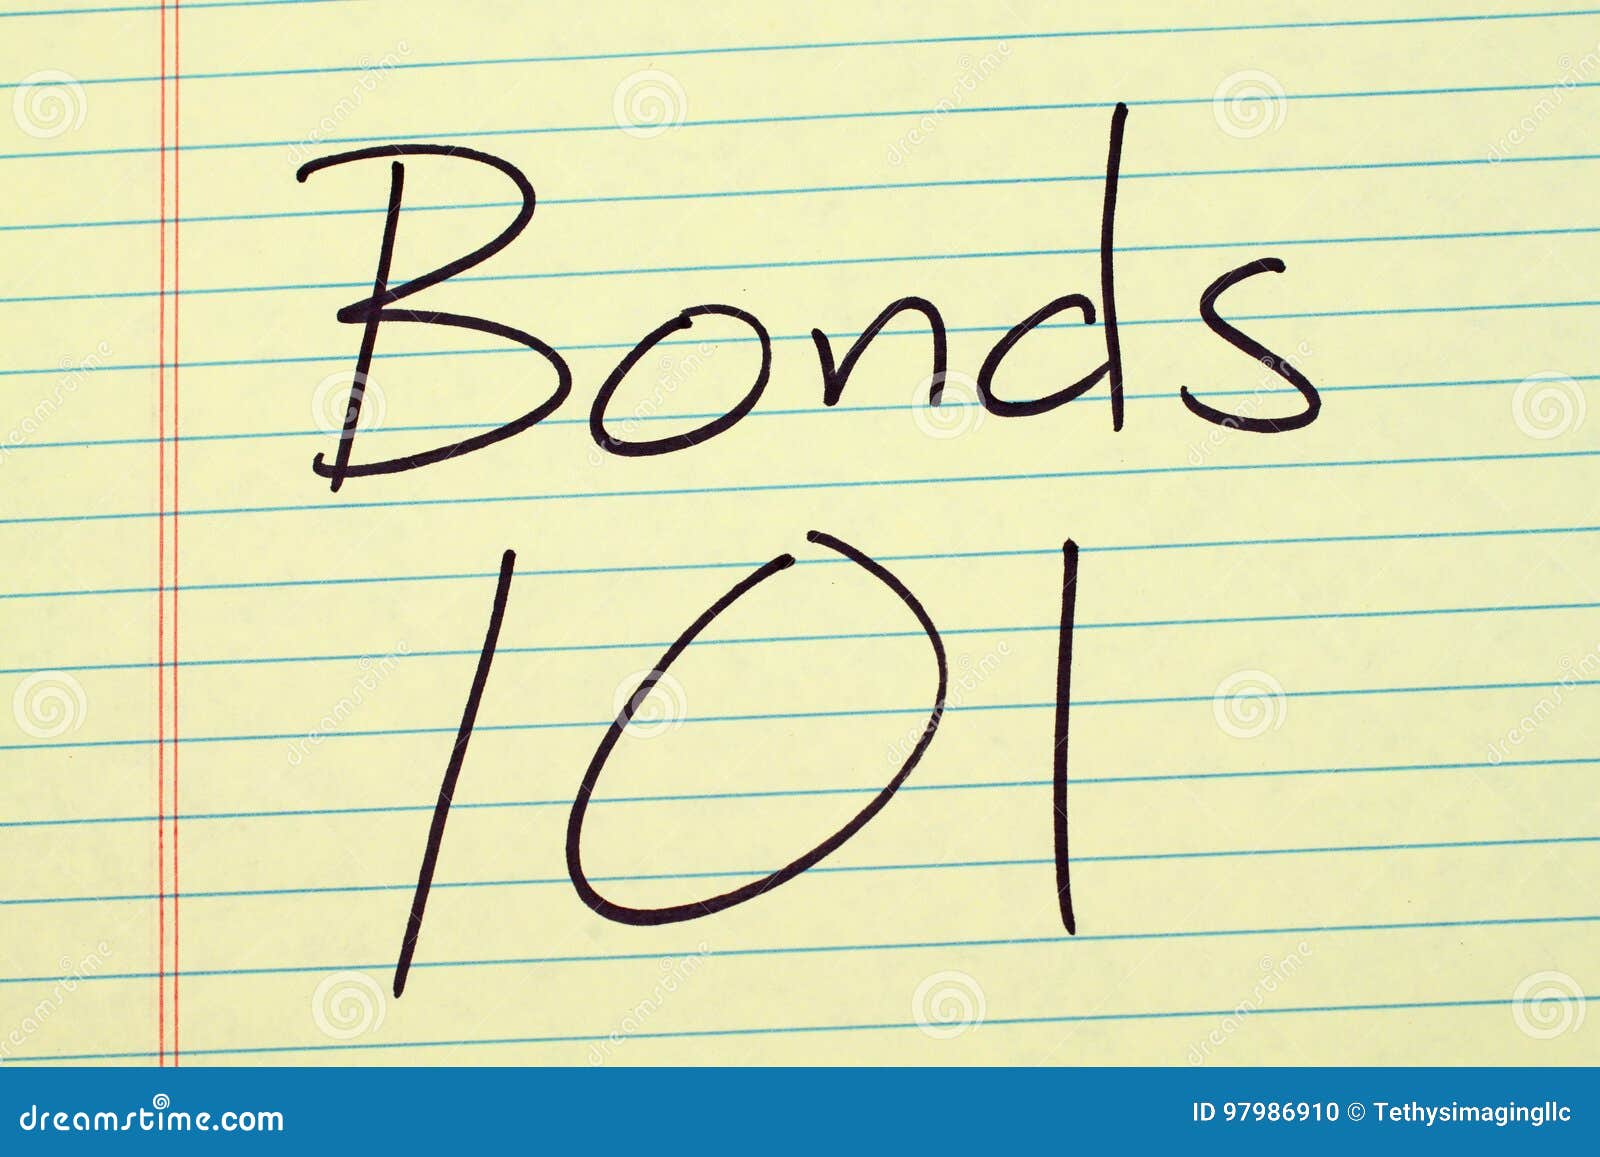 bonds 101 on a yellow legal pad